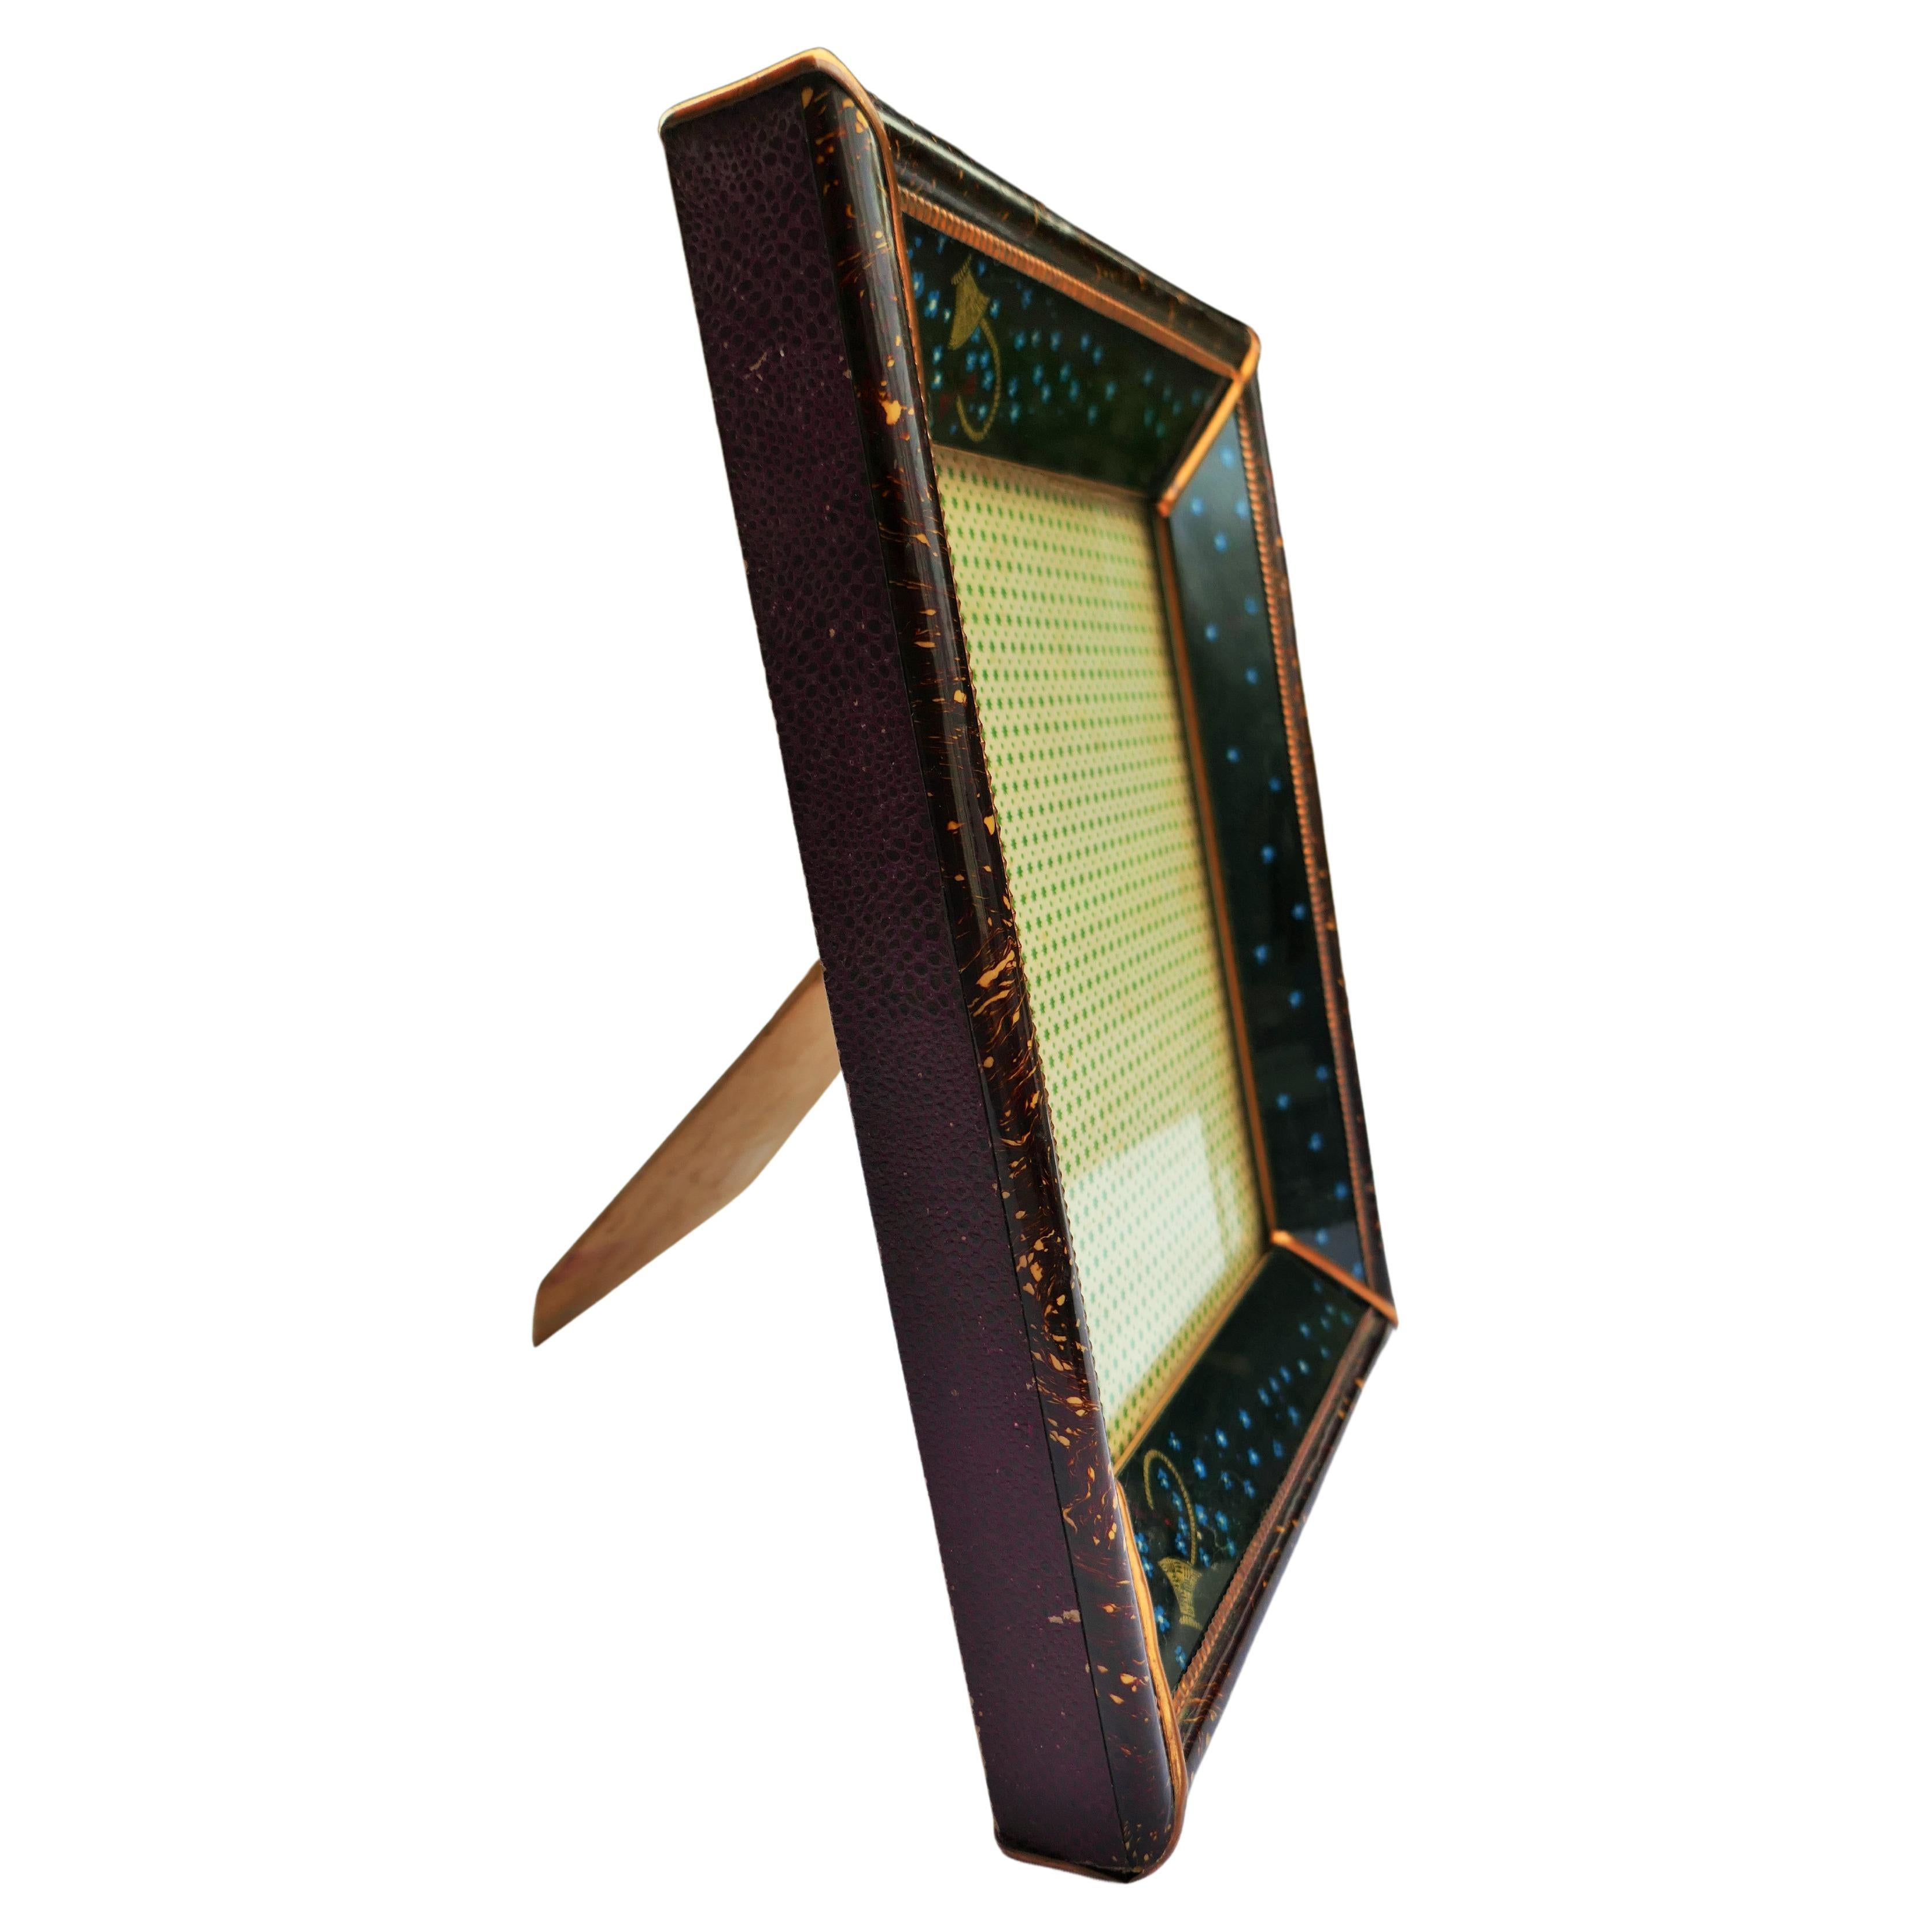 Italian Wood and glass photo frame - possible Art Deco For Sale